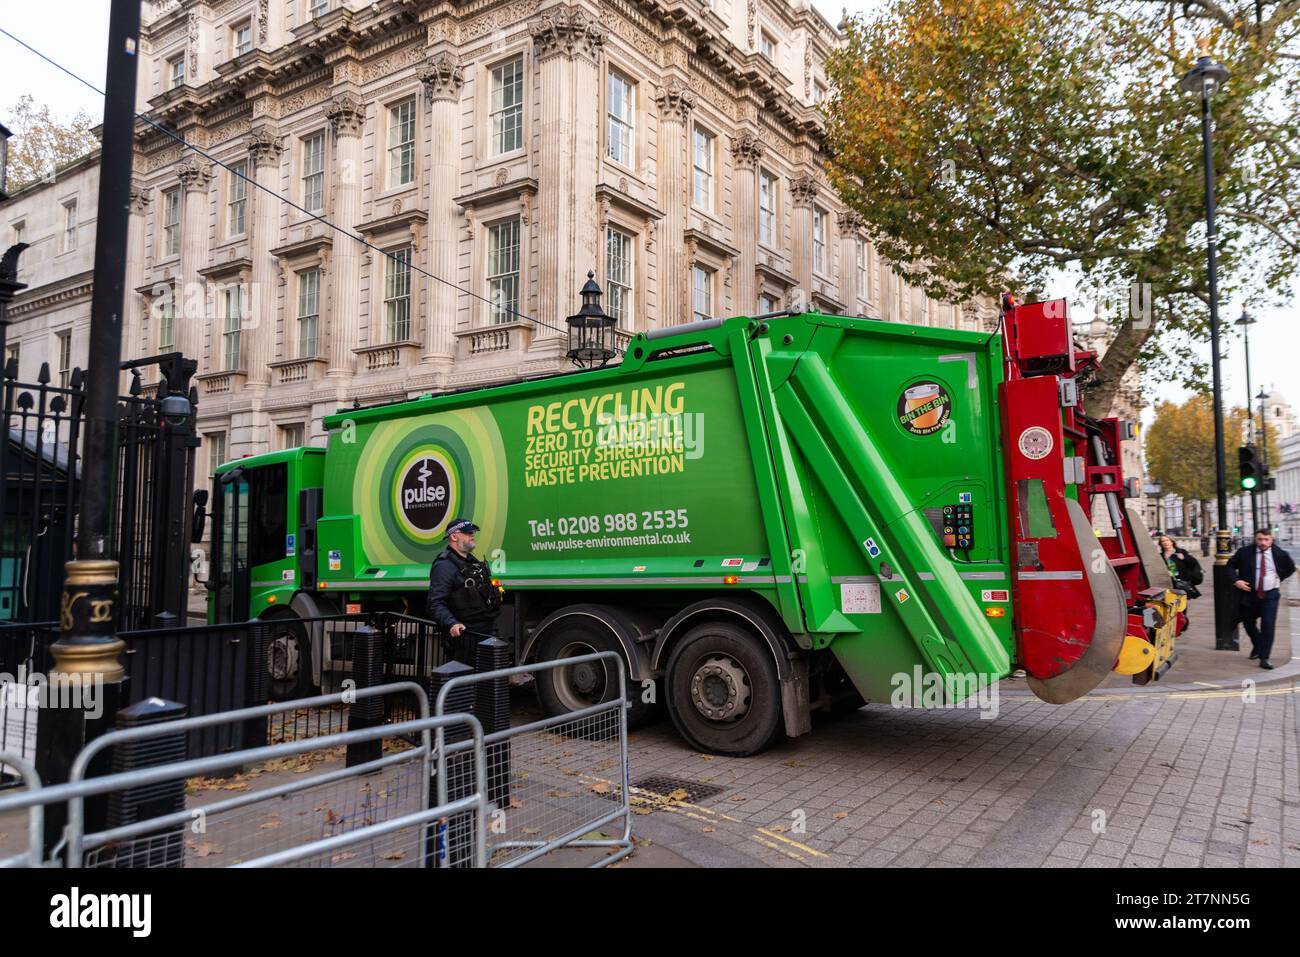 Rubbish collection lorry entering Downing Street off Whitehall, Westminster, London, UK. Home of Prime Minister. Recycling truck Stock Photo